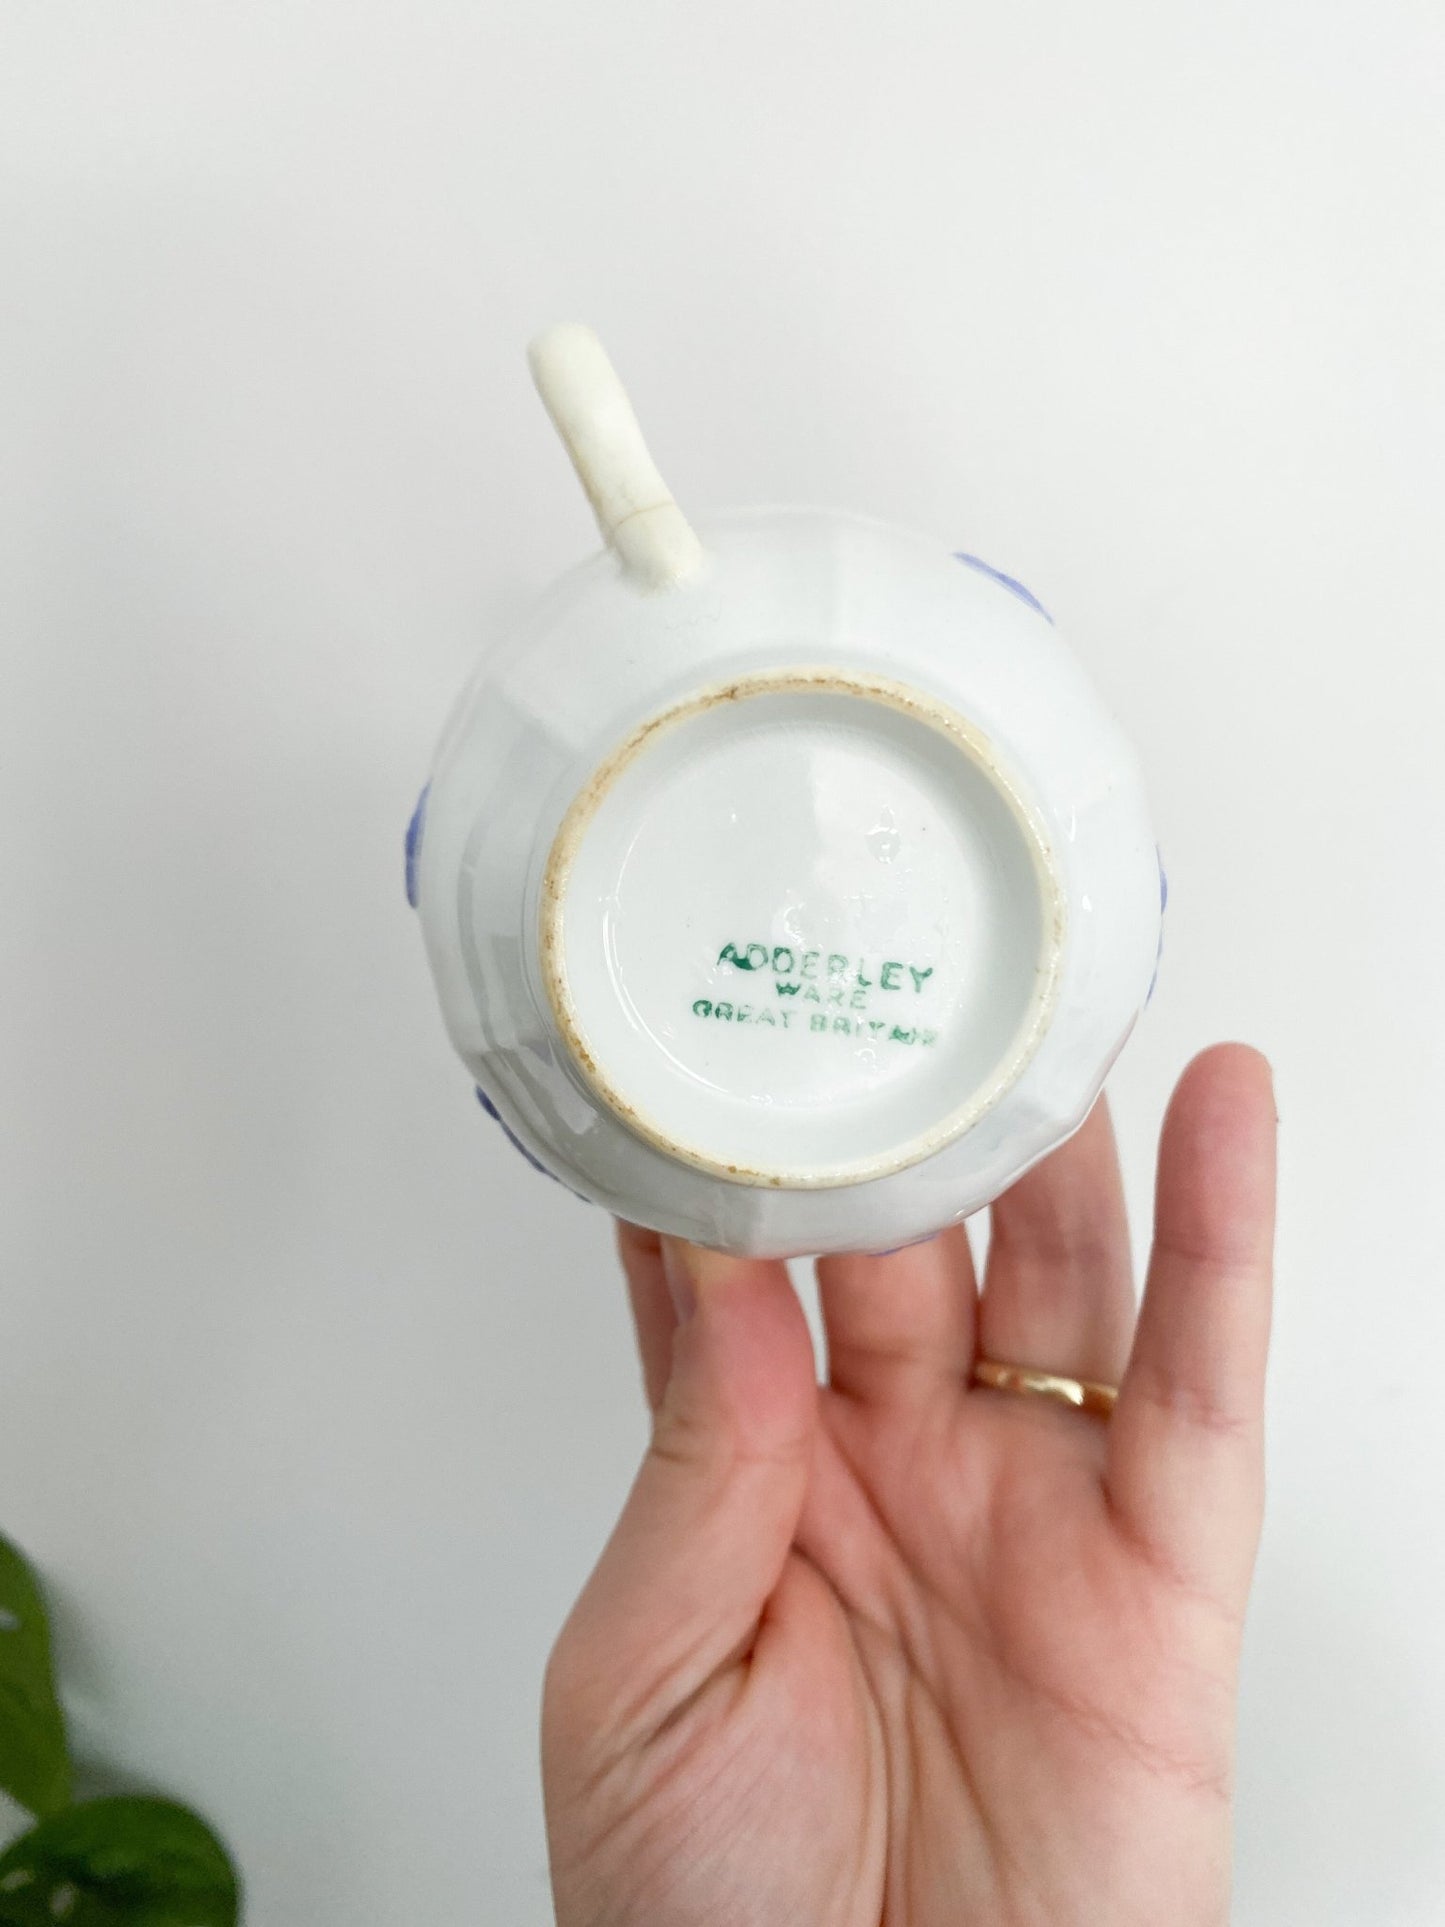 Woman holding Adderley tea cup in her hand. The woman is showing the cup&#39;s backside where the stamp resides. The teacup is white and the stamp is worn with the green logo that says "Adderley Ware Great Britain"